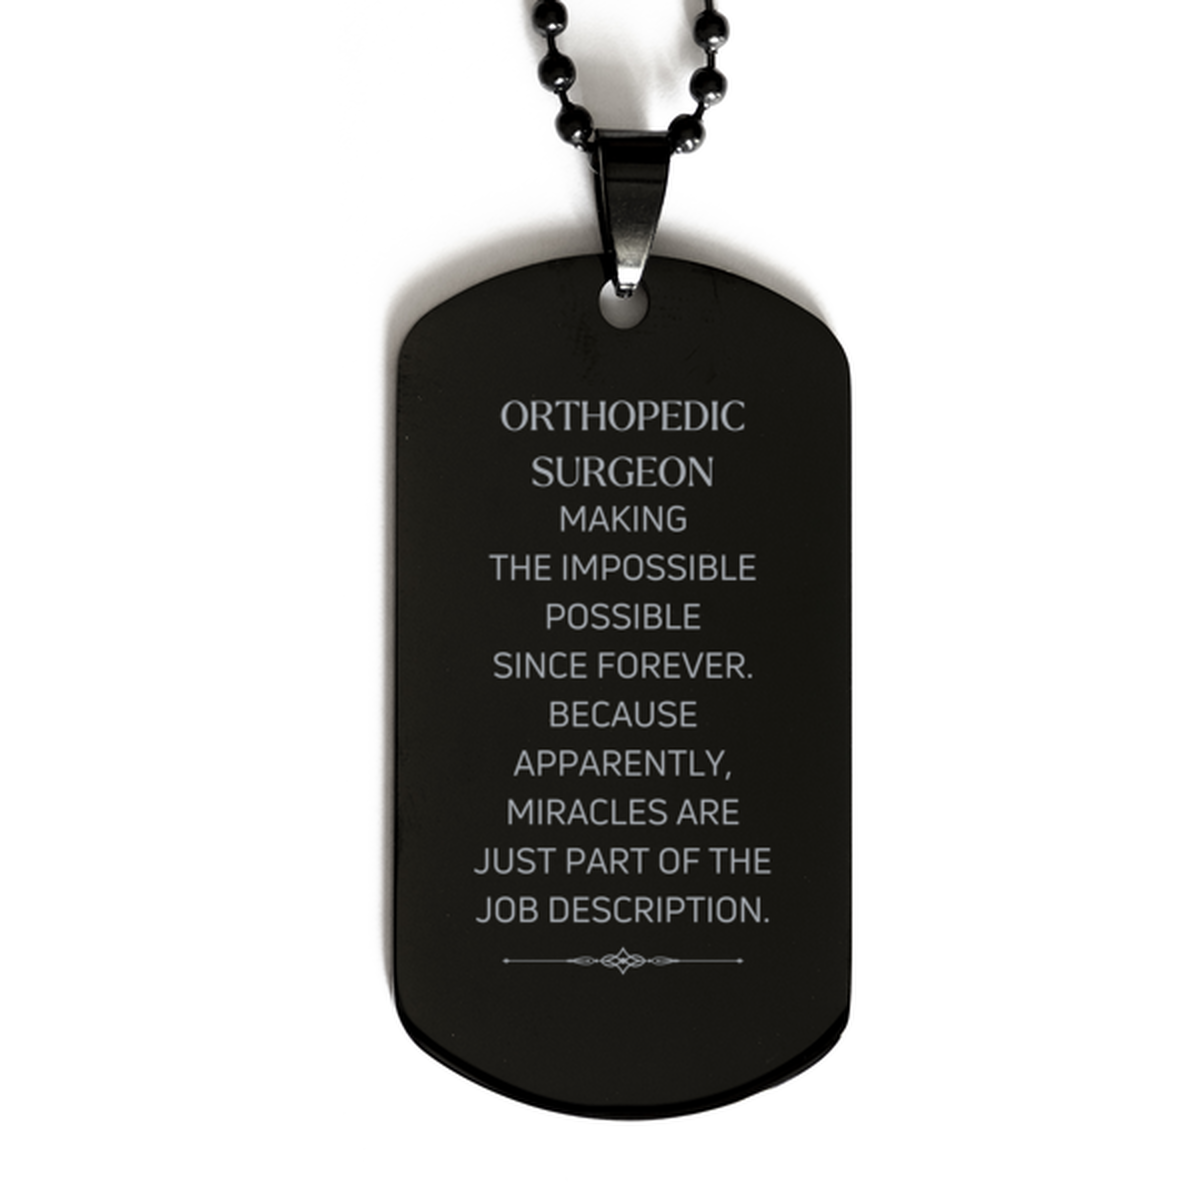 Funny Orthopedic Surgeon Gifts, Miracles are just part of the job description, Inspirational Birthday Black Dog Tag For Orthopedic Surgeon, Men, Women, Coworkers, Friends, Boss